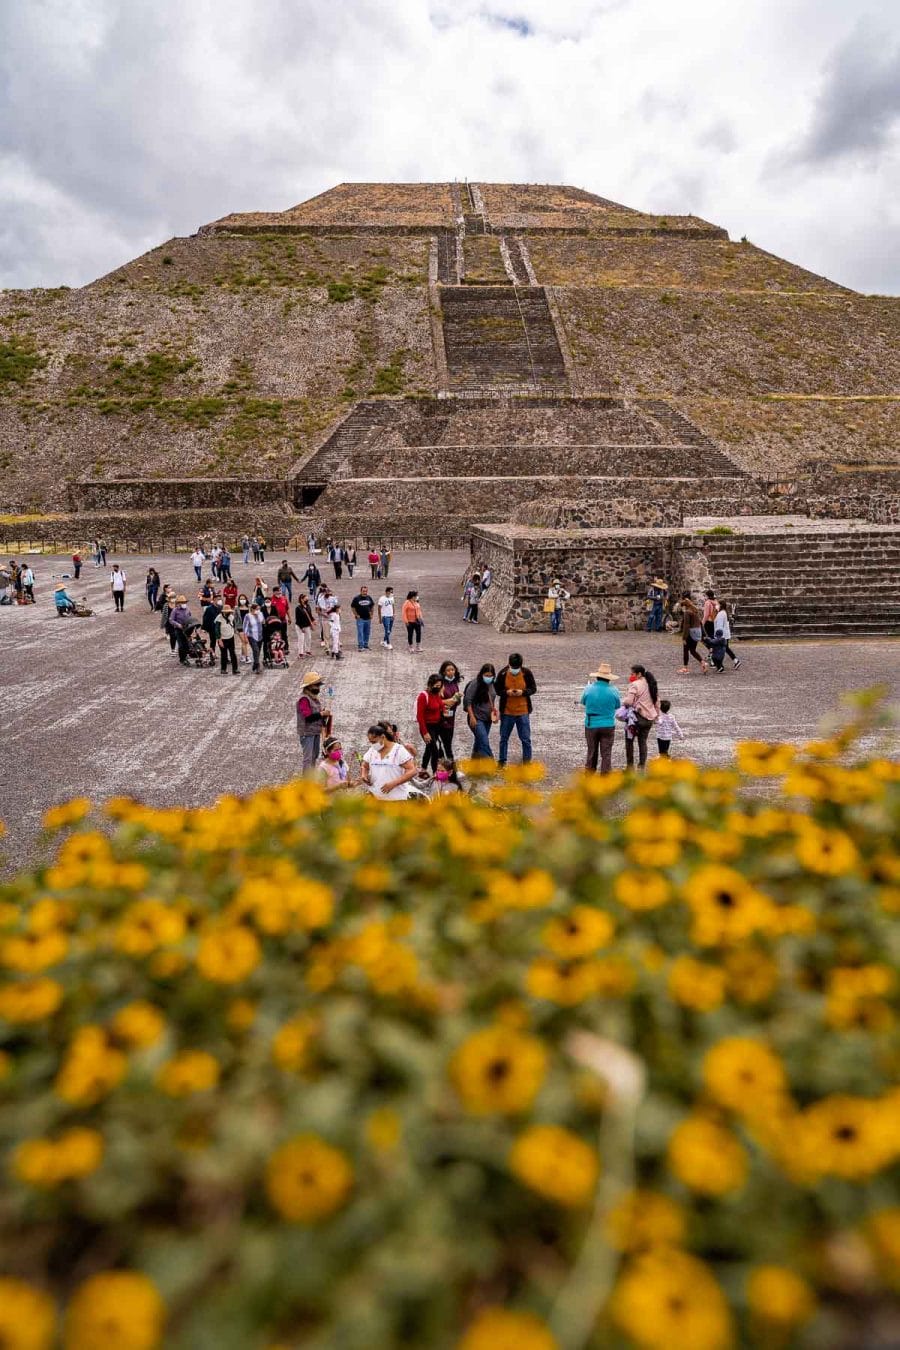 Temple of the Sun at Teotihuacan, Mexico